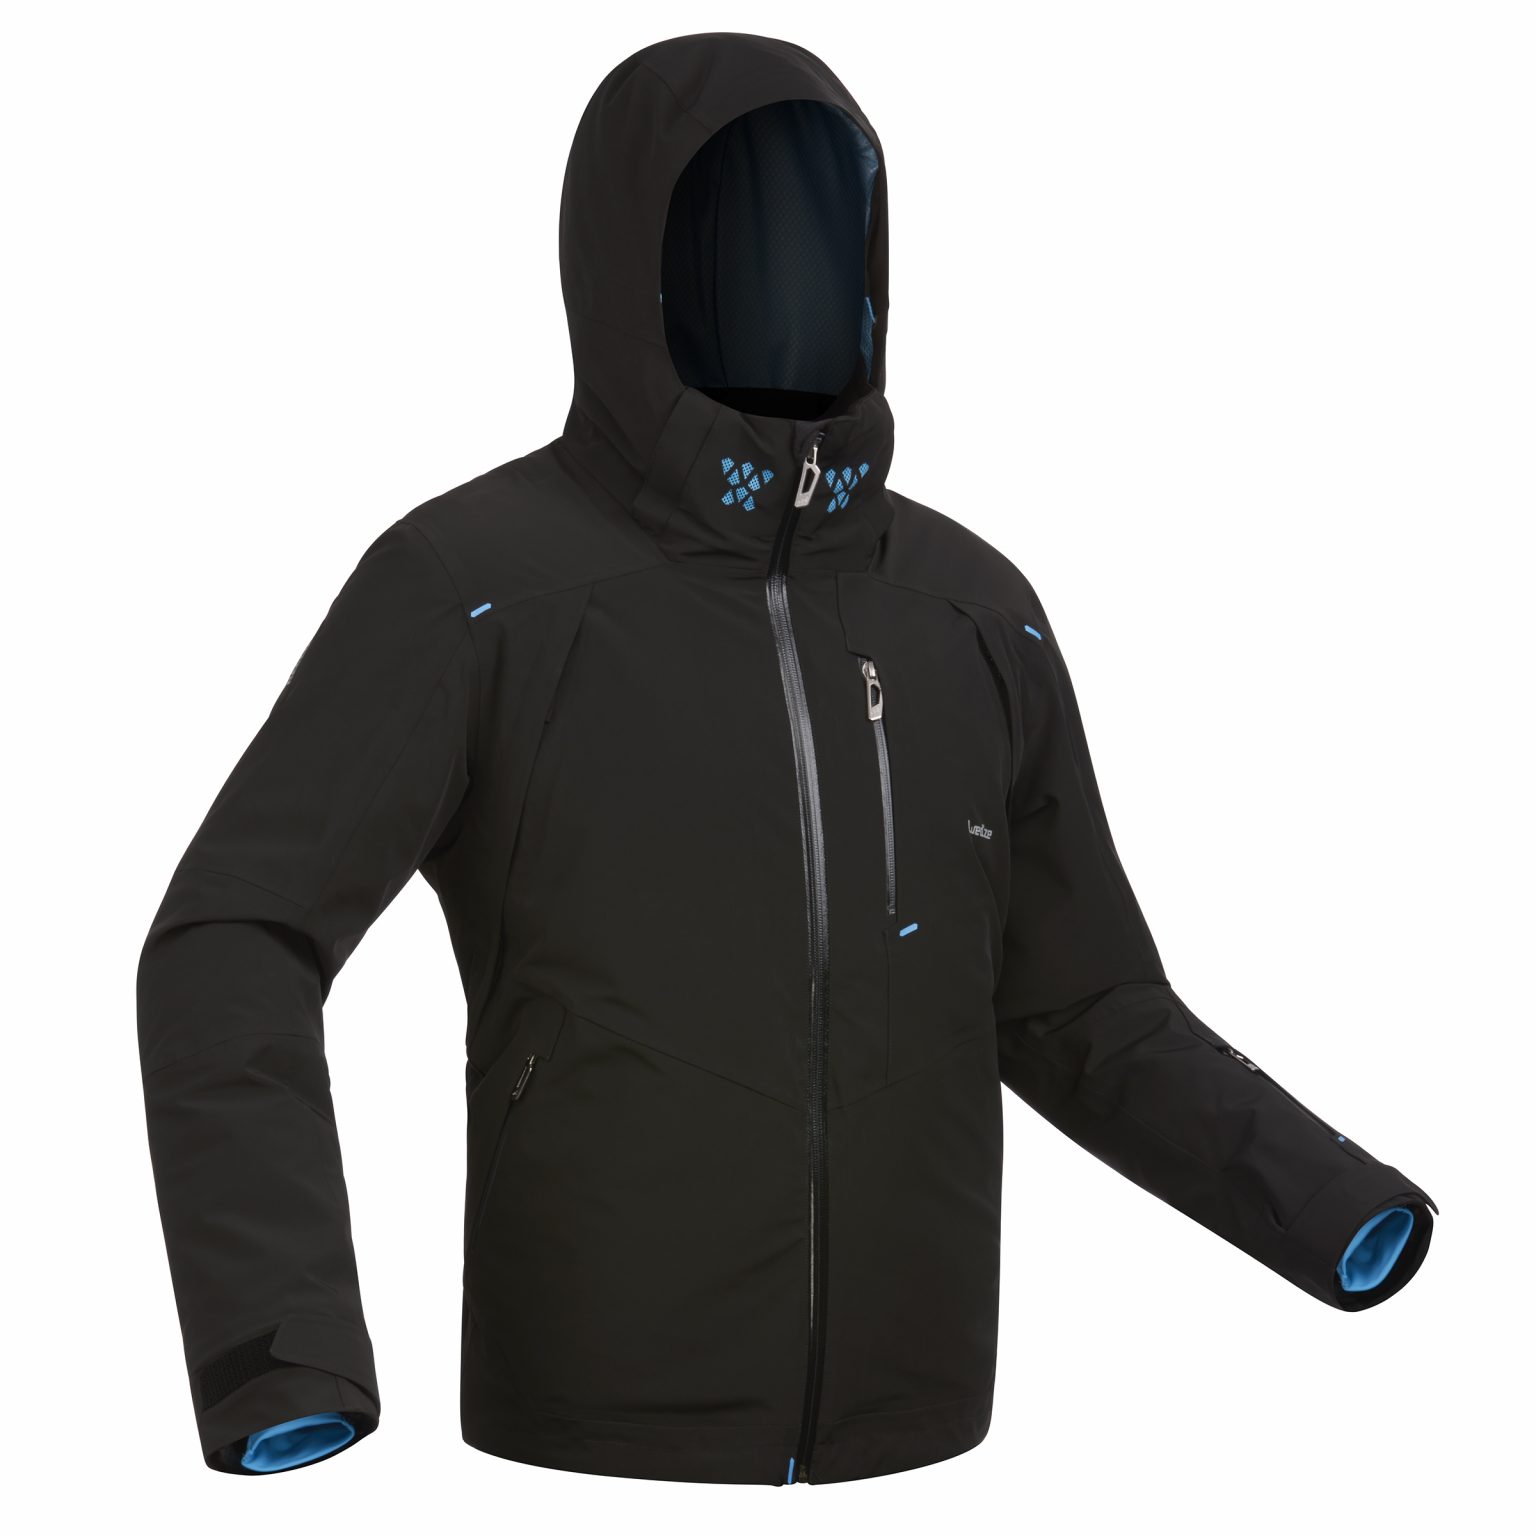 Decathlon skiing gear keeps you warm and dry, whatever the weather ...